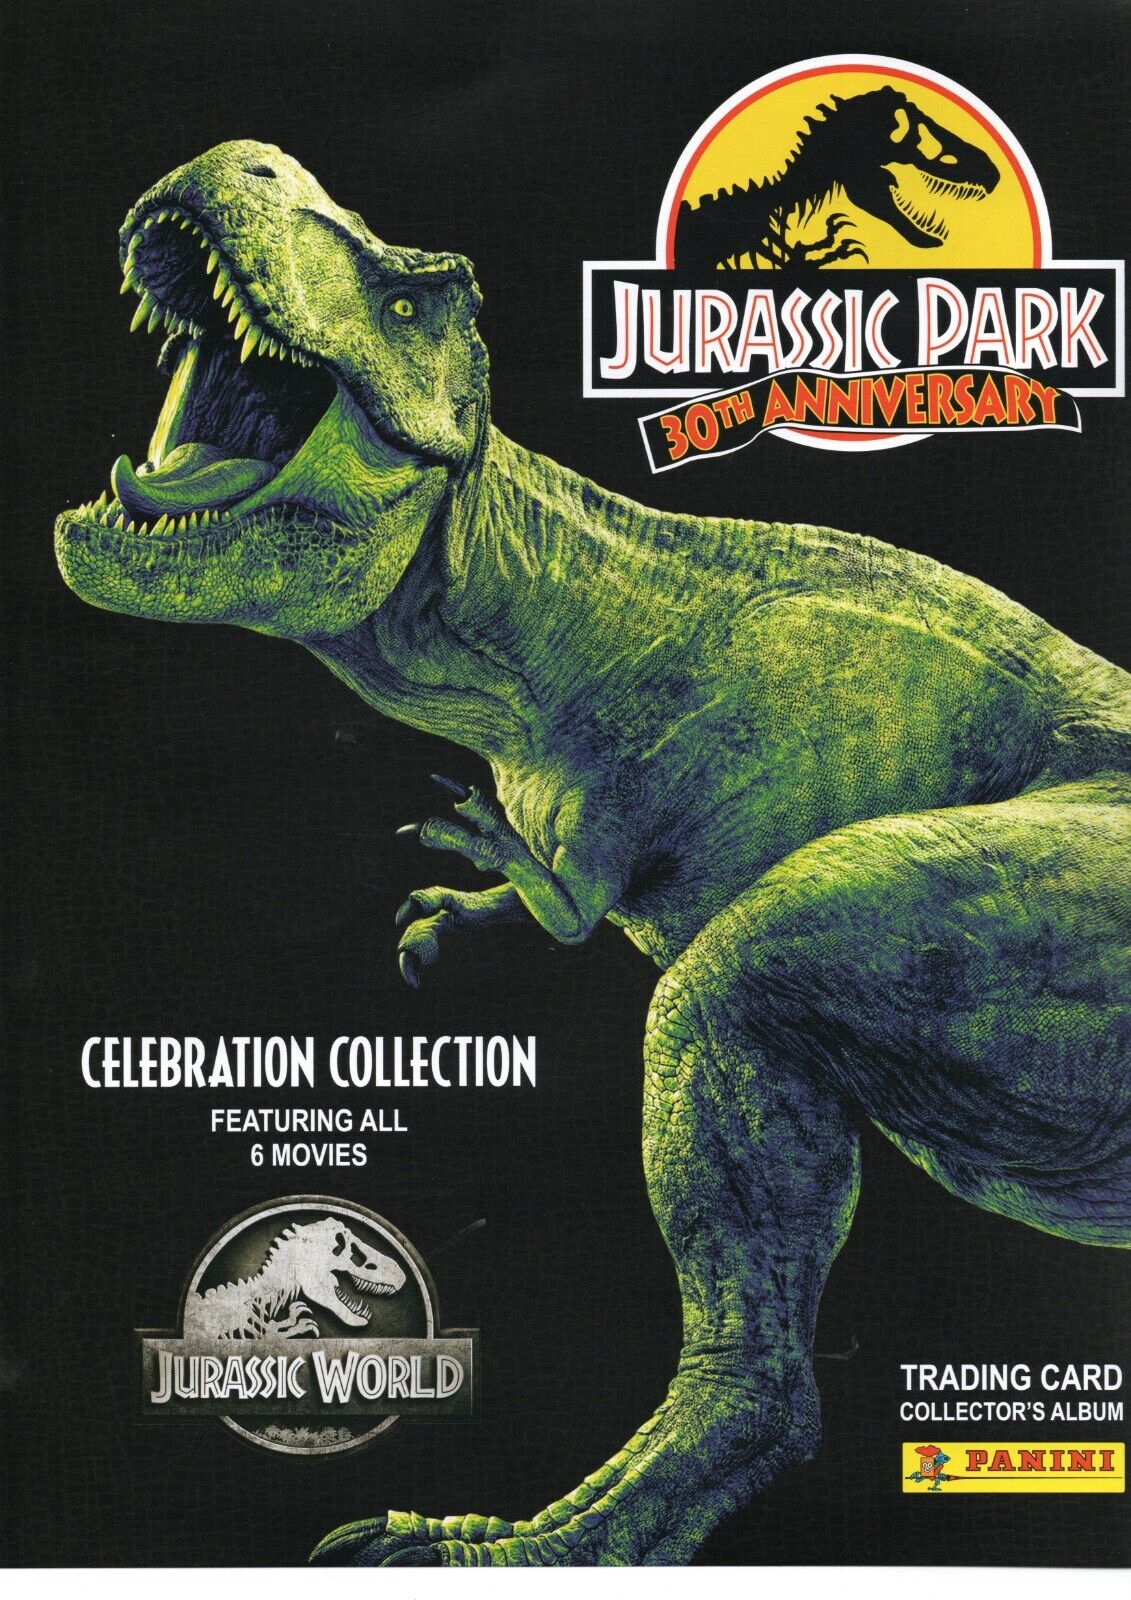 Panini Jurassic Park 30th Anniversary trading cards Limited Edition ...